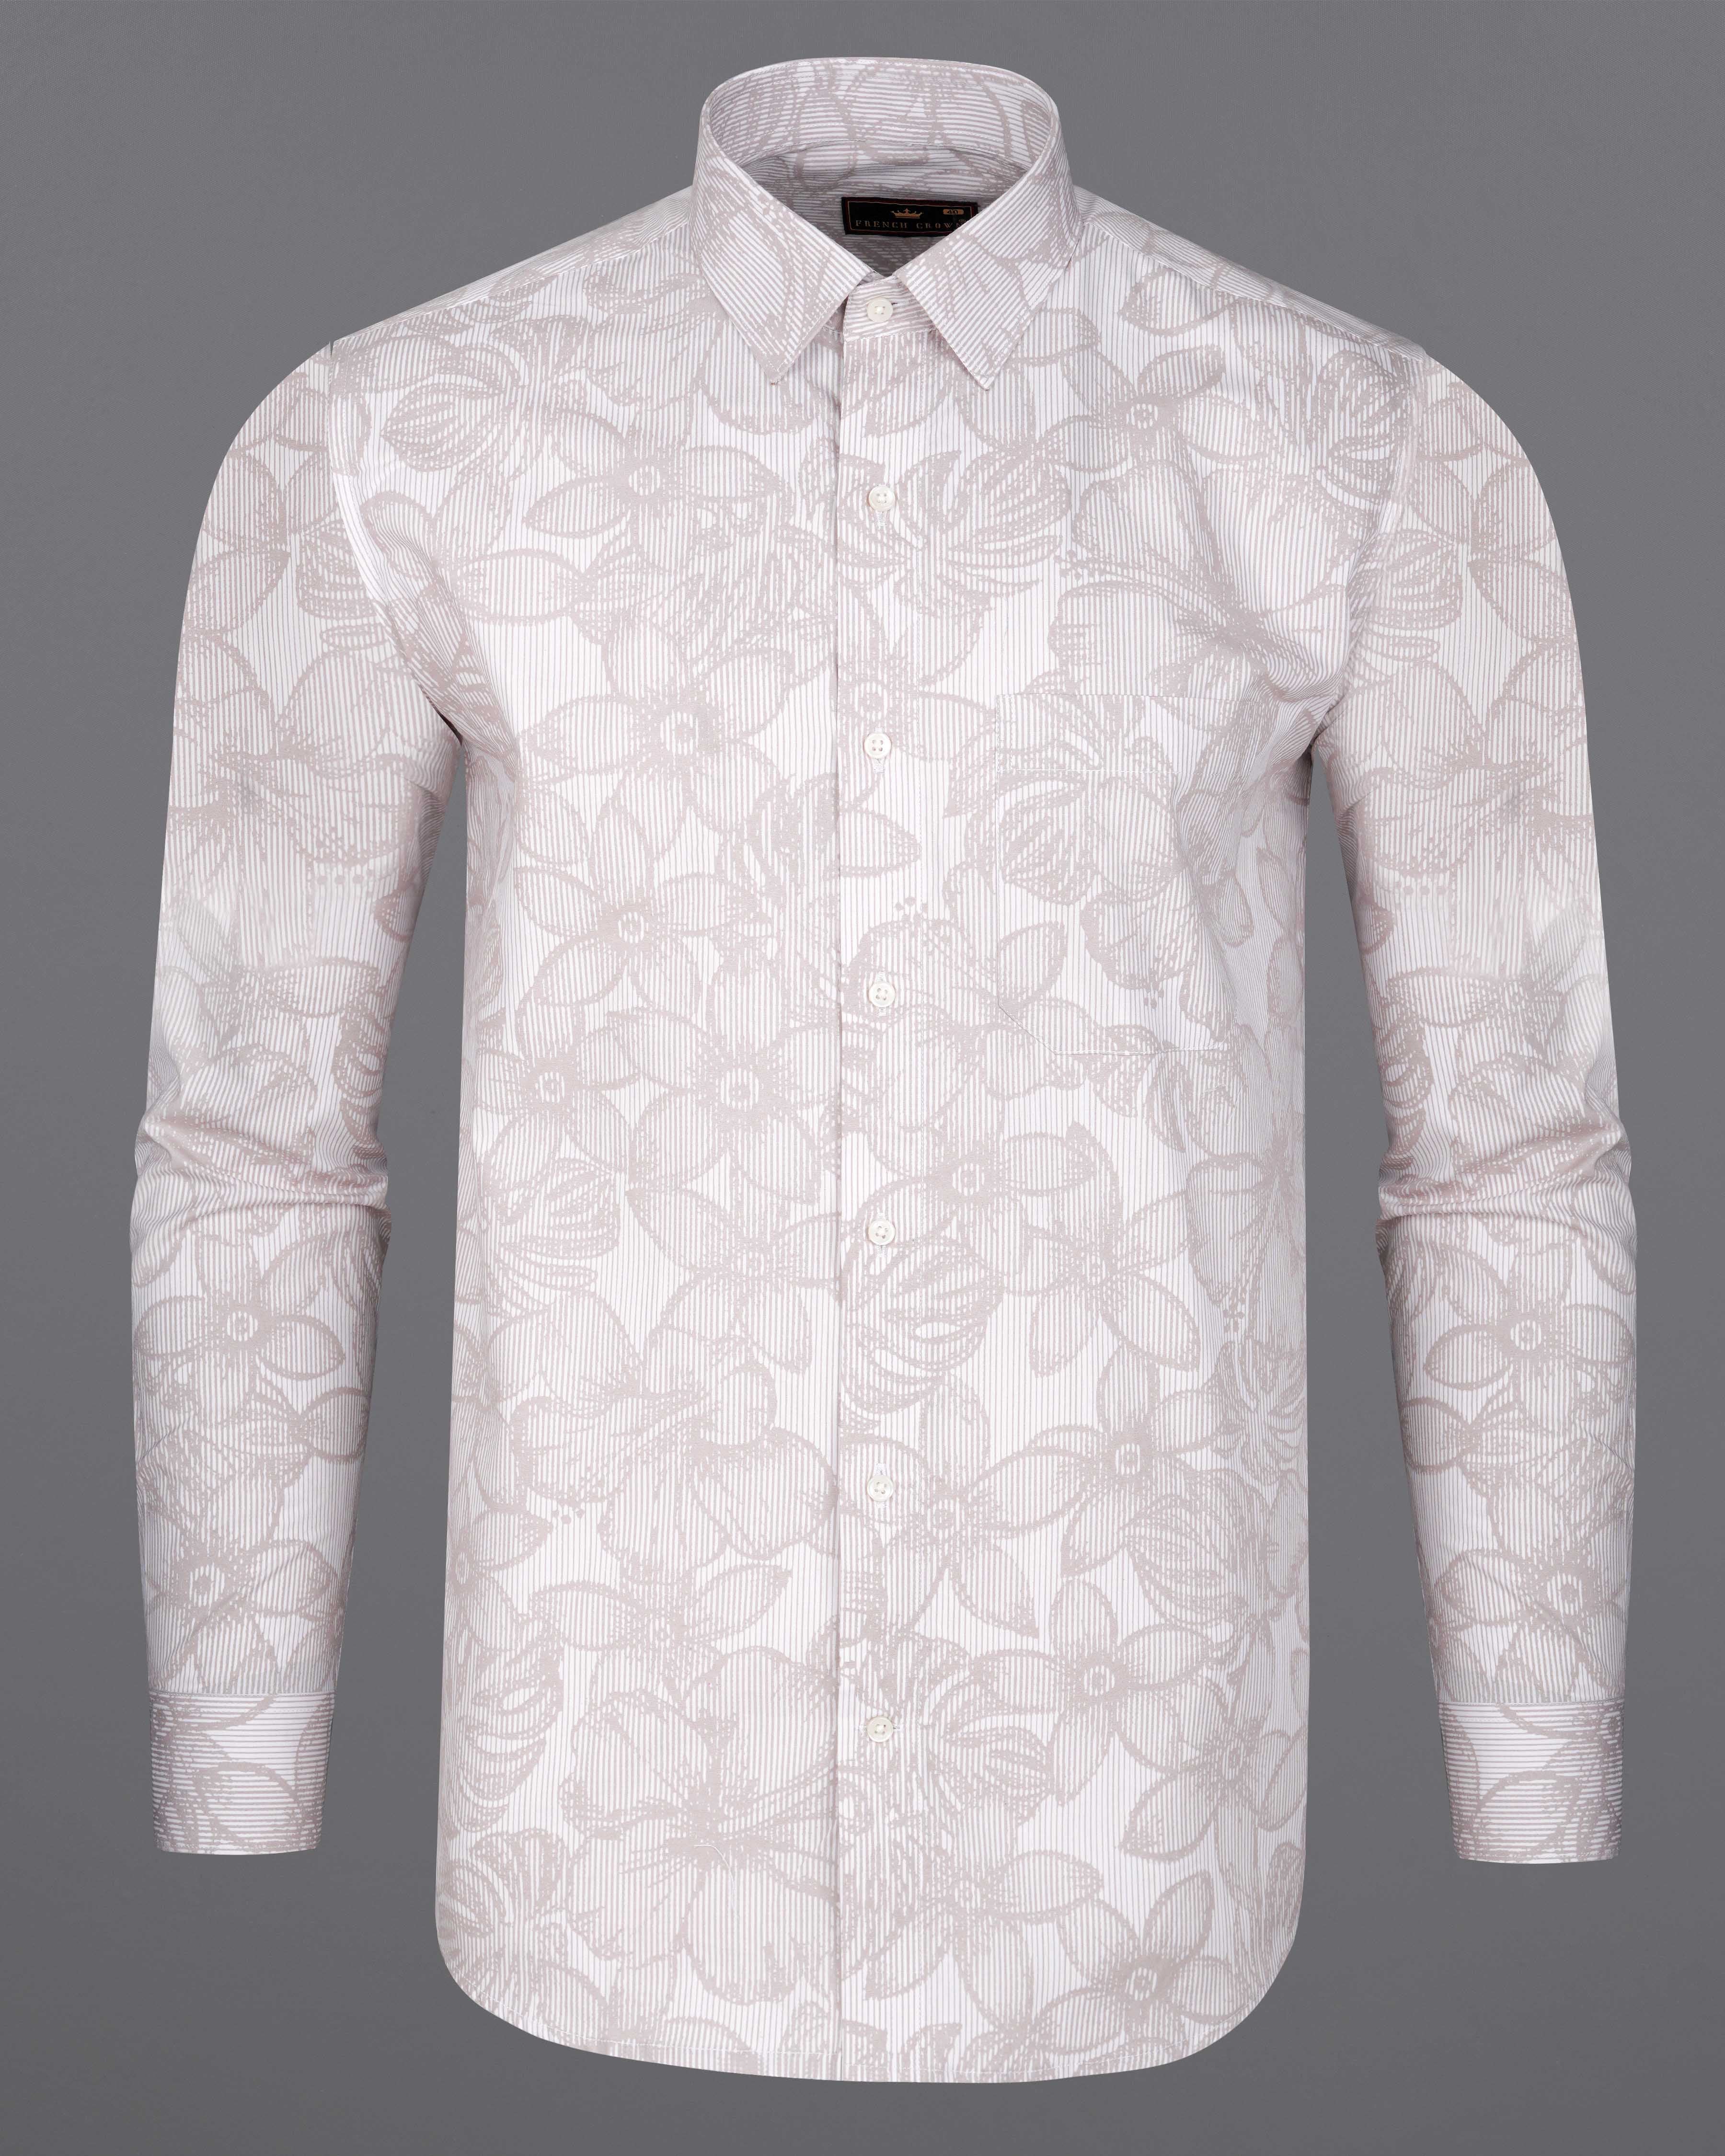 Pale Slate Brown and White Floral Printed Premium Cotton Shirt 8028-38,8028-38,8028-39,8028-39,8028-40,8028-40,8028-42,8028-42,8028-44,8028-44,8028-46,8028-46,8028-48,8028-48,8028-50,8028-50,8028-52,8028-52